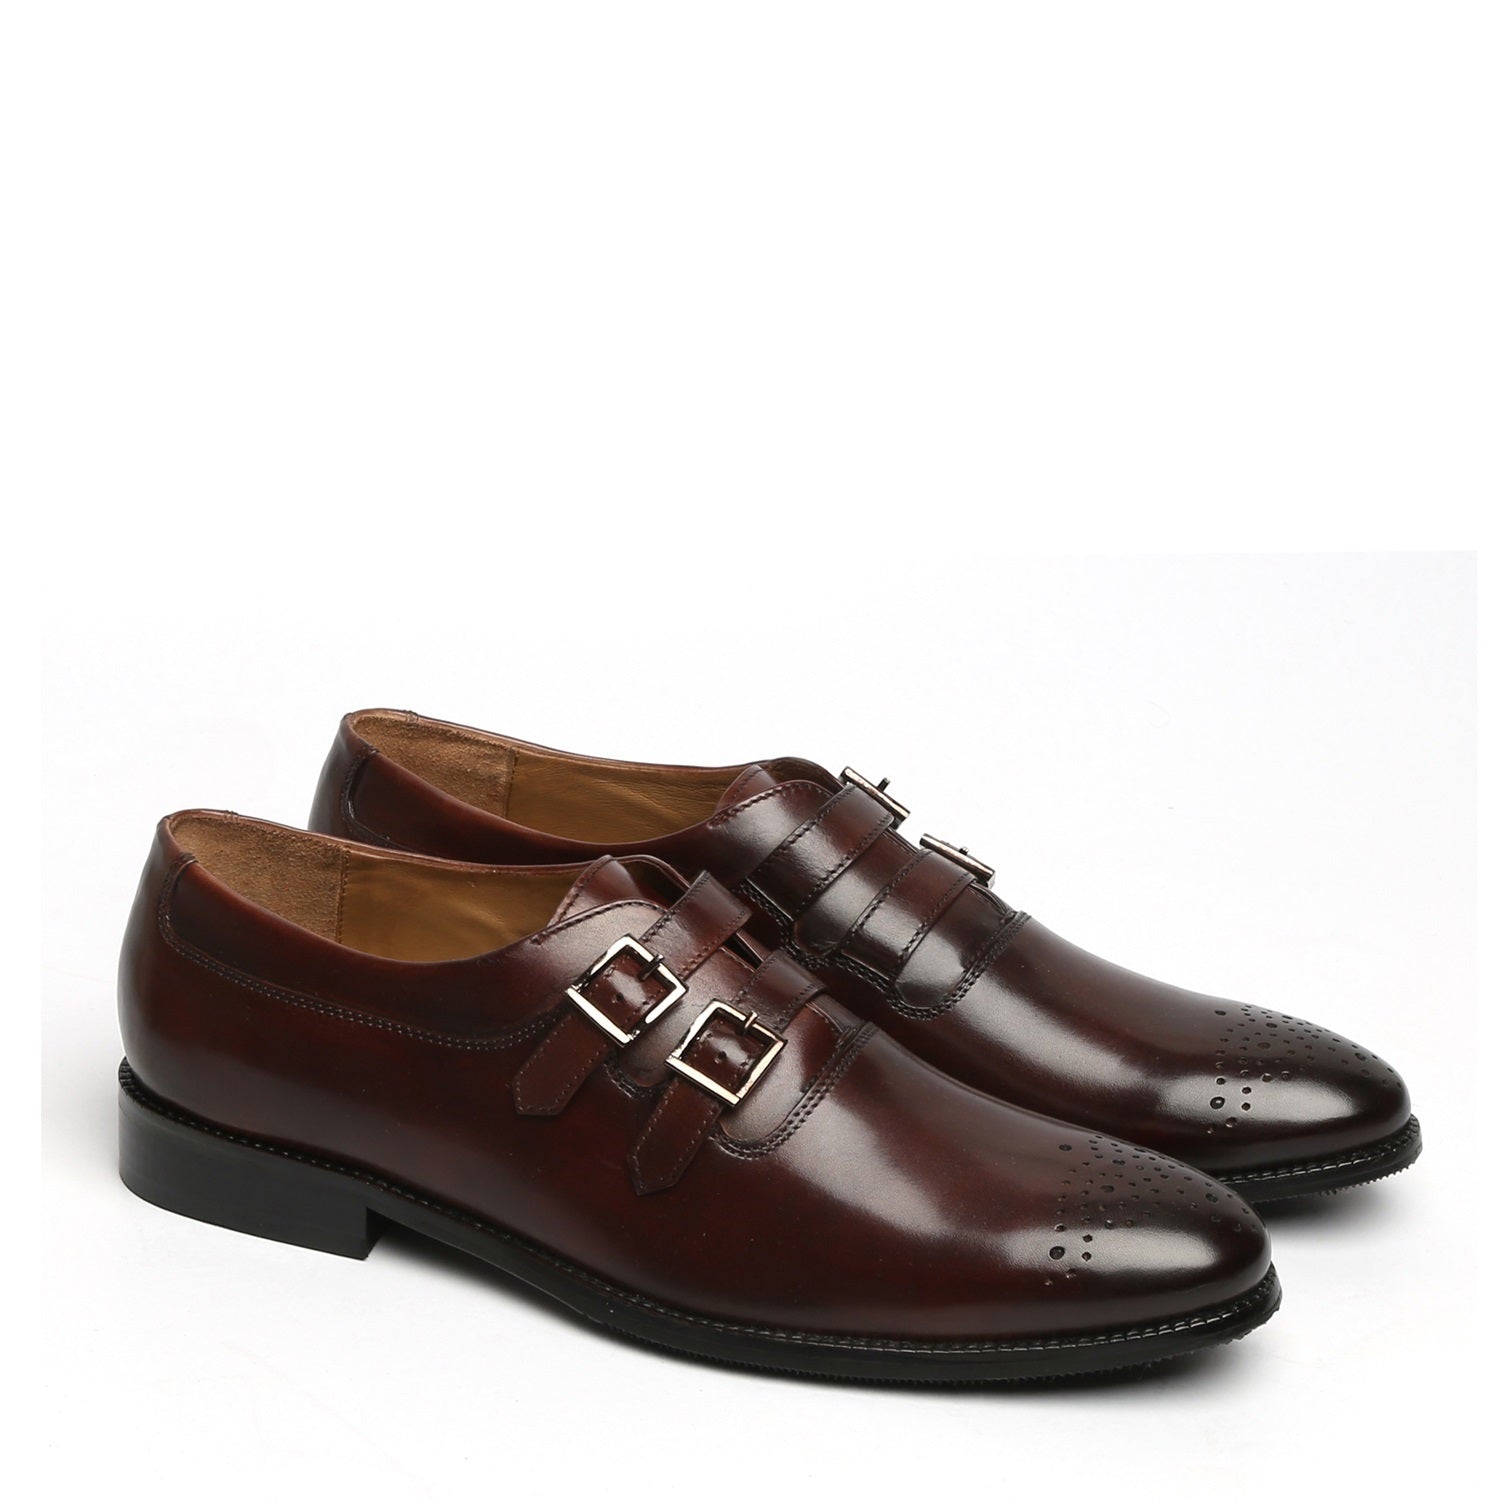 BROWN PARALLEL DOUBLE MONK STRAPS LEATHER FORMAL SHOES BY BRUNE & BARESKIN